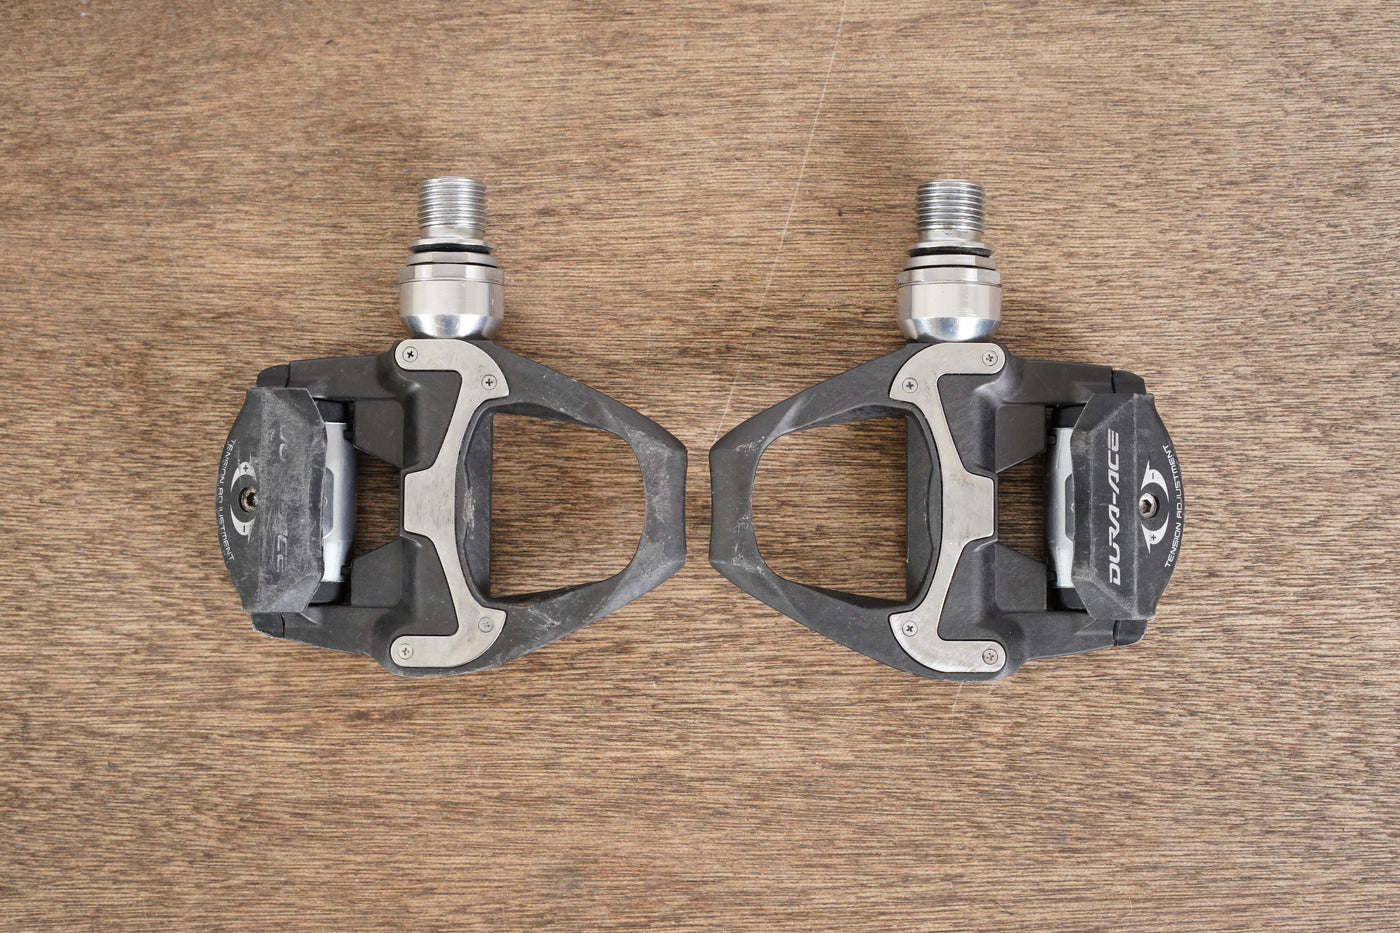 Shimano Dura-Ace PD-9000 SPD-SL Carbon Clipless Road Bike Pedals 249g